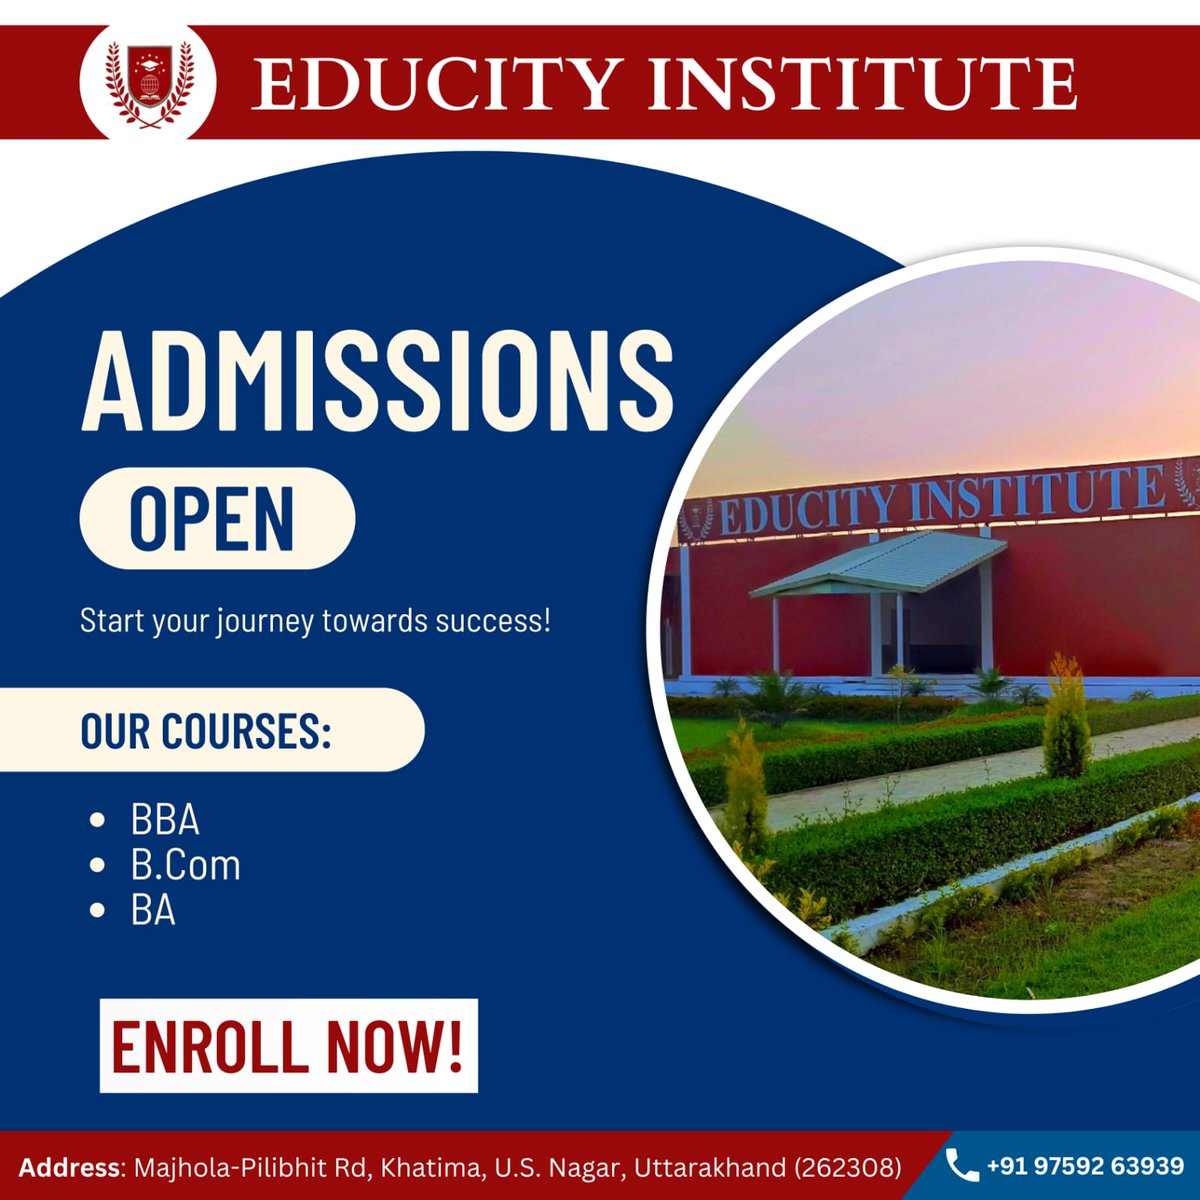 Unlock your potential and open the doors to your future! College admissions now open.

#admissionopen #college #enrollnow #studentjourney #educityinstitute #khatima